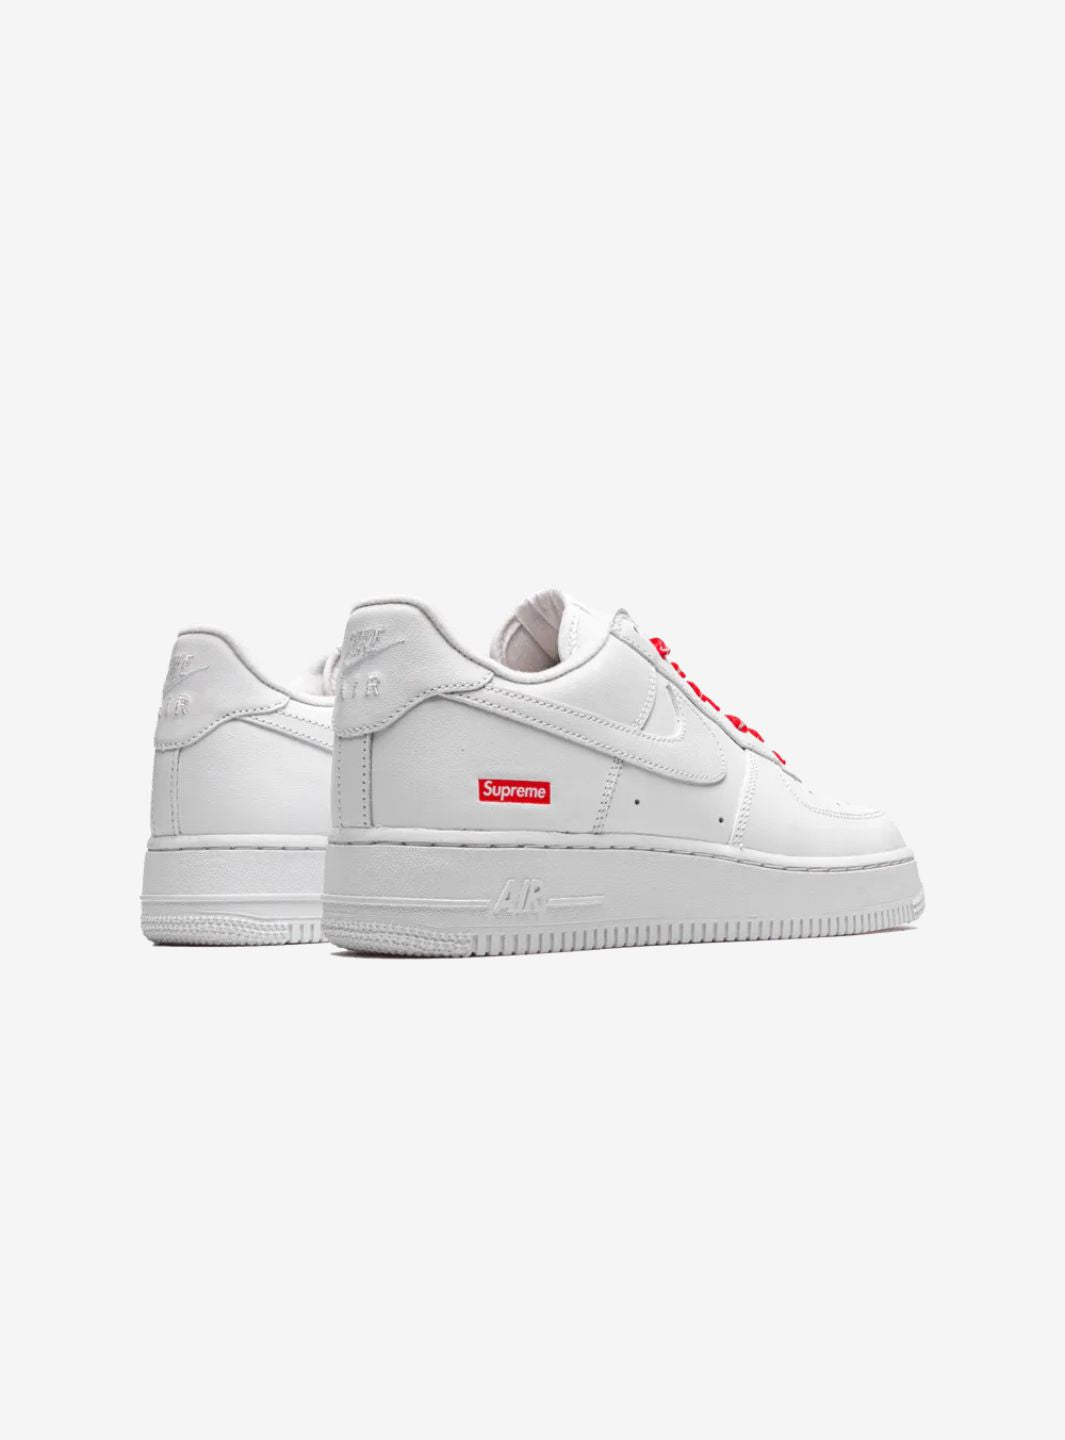 Nike Air Force 1 Low Supreme White - CU9225-100 | ResellZone